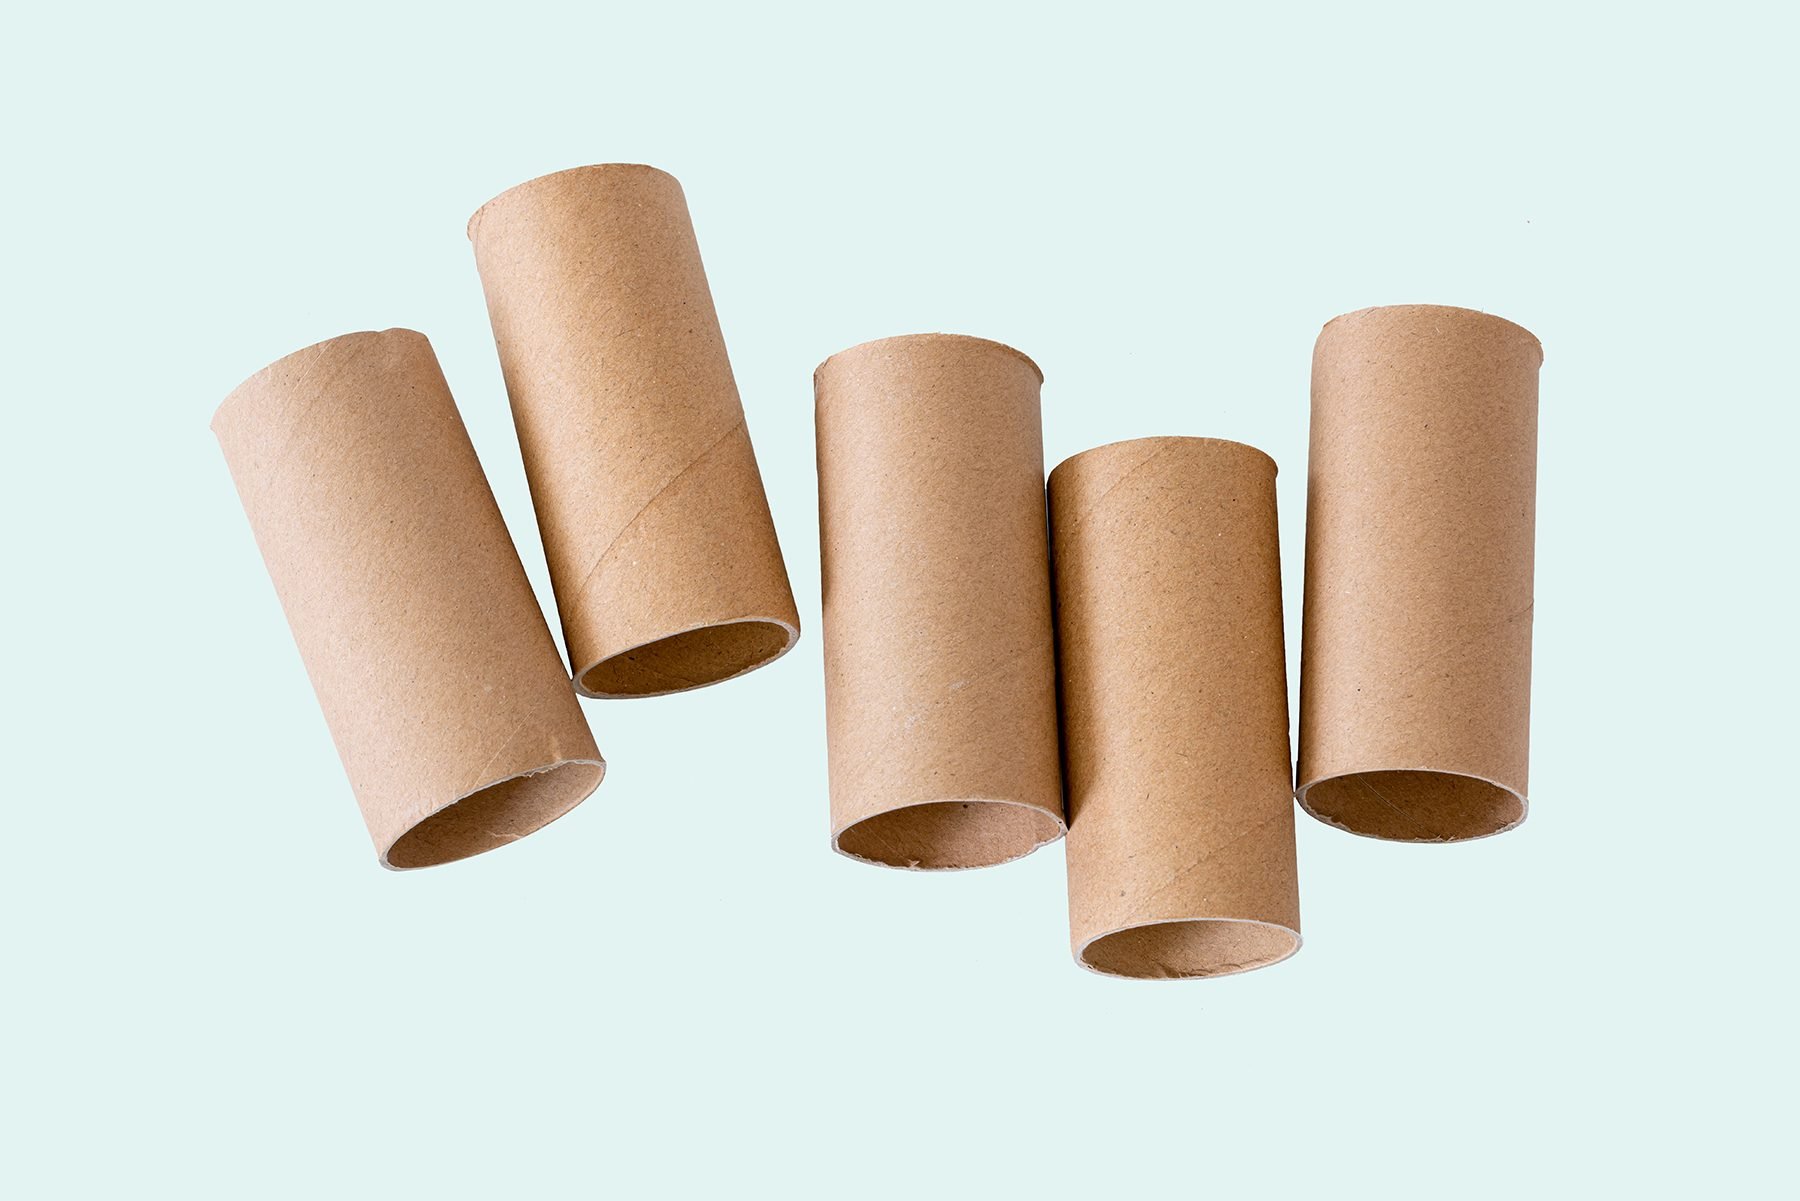 Lot of 18-Empty Paper Towel Rolls for Art & Craft projects-Brown Cardboard